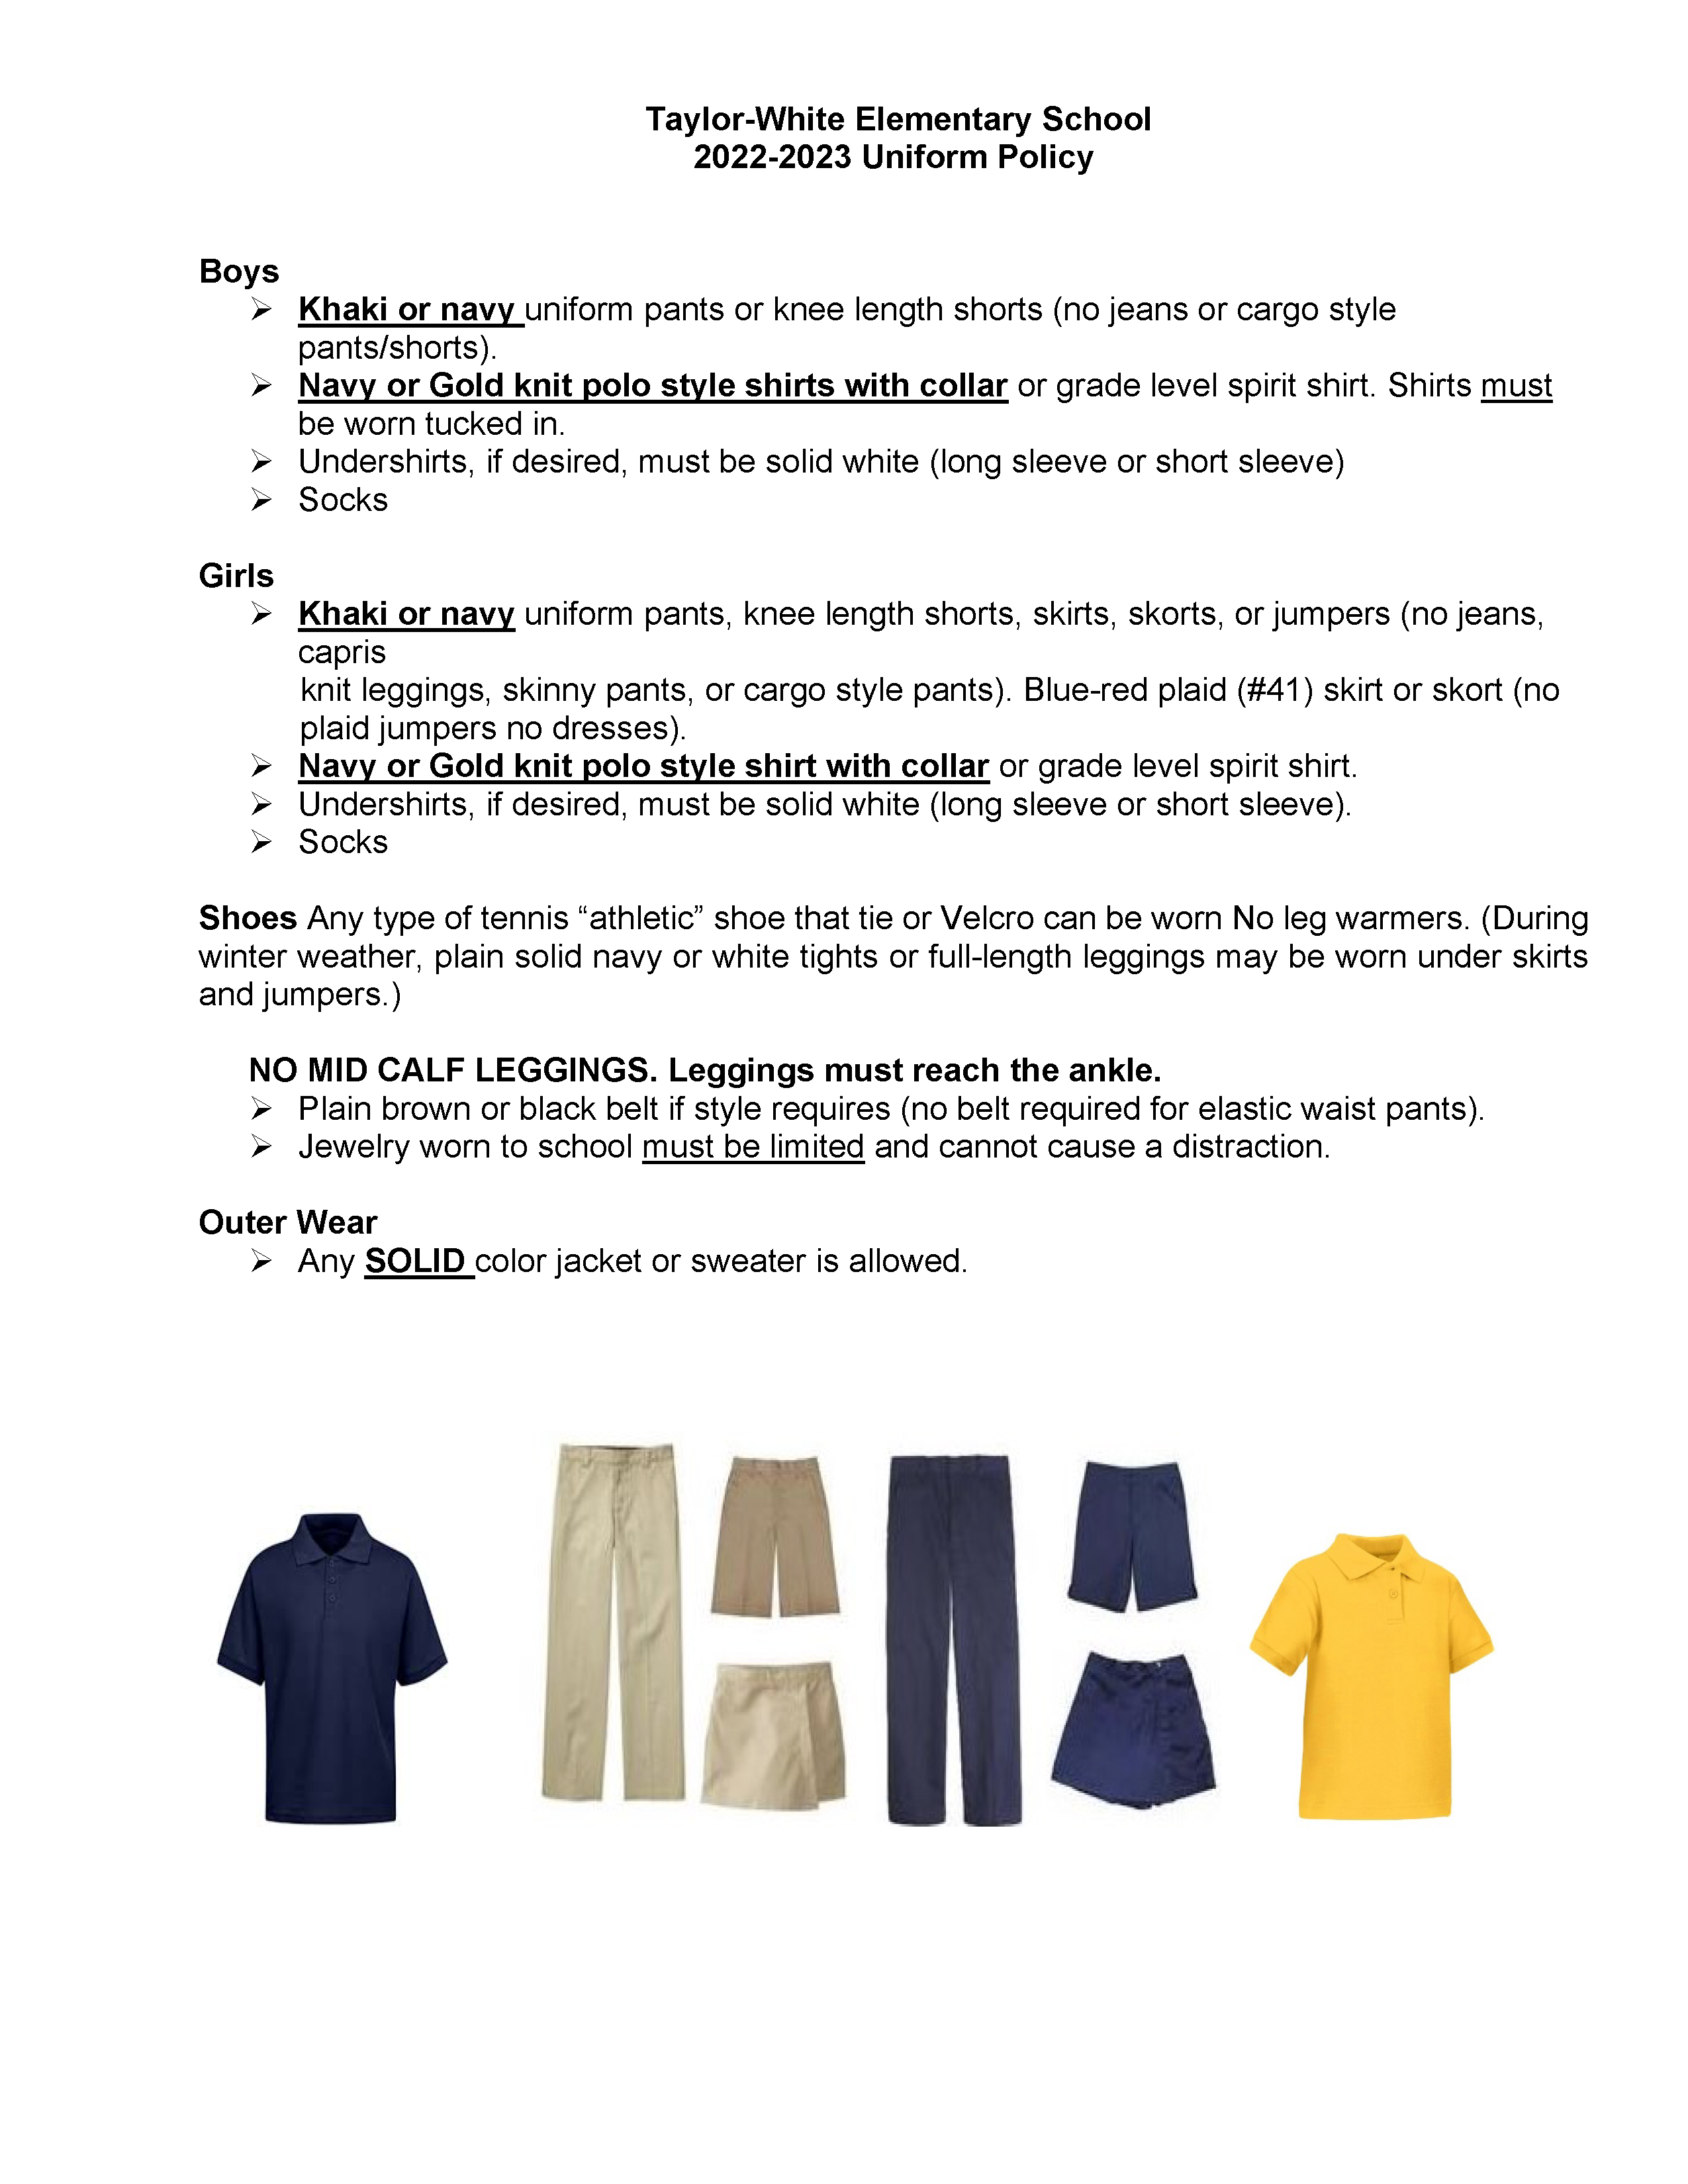 Uniform Policy for the 2022 - 2023 School Year